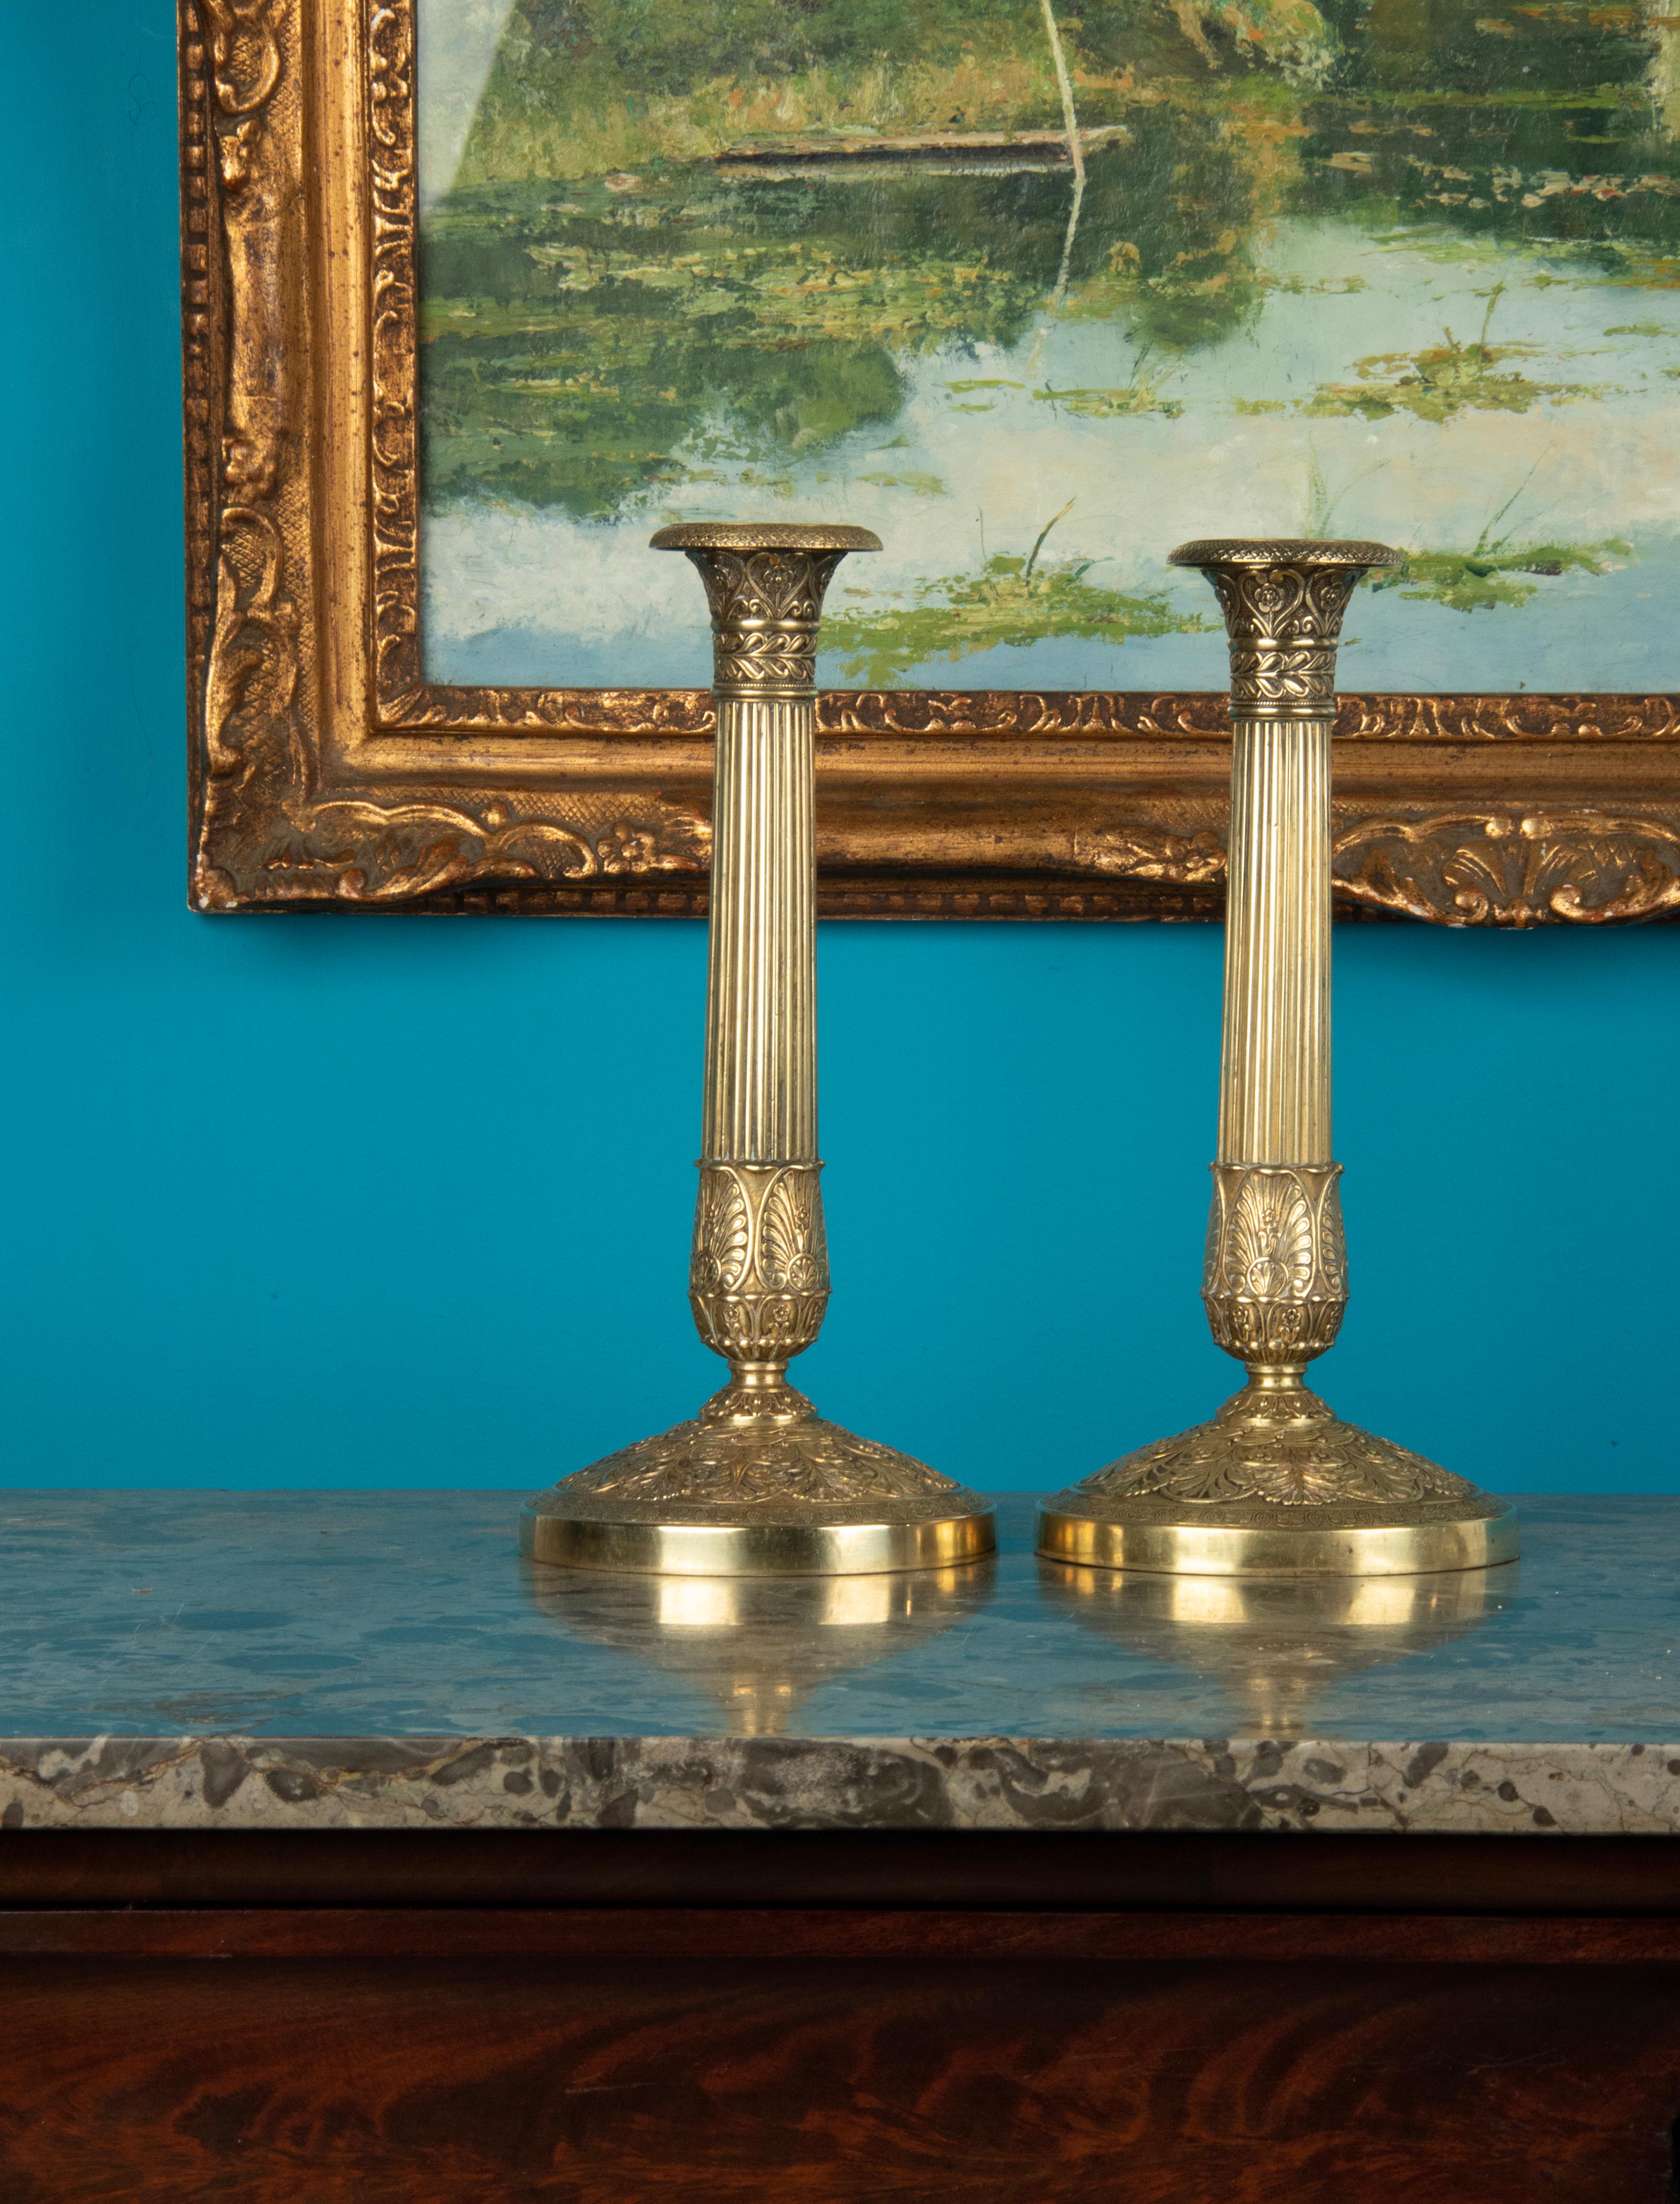 A pair of brass candlesticks. Beautifully decorated with stylized flowers and a fluted stem in Empire style. The candlesticks date from around 1880-1890, originating from France.